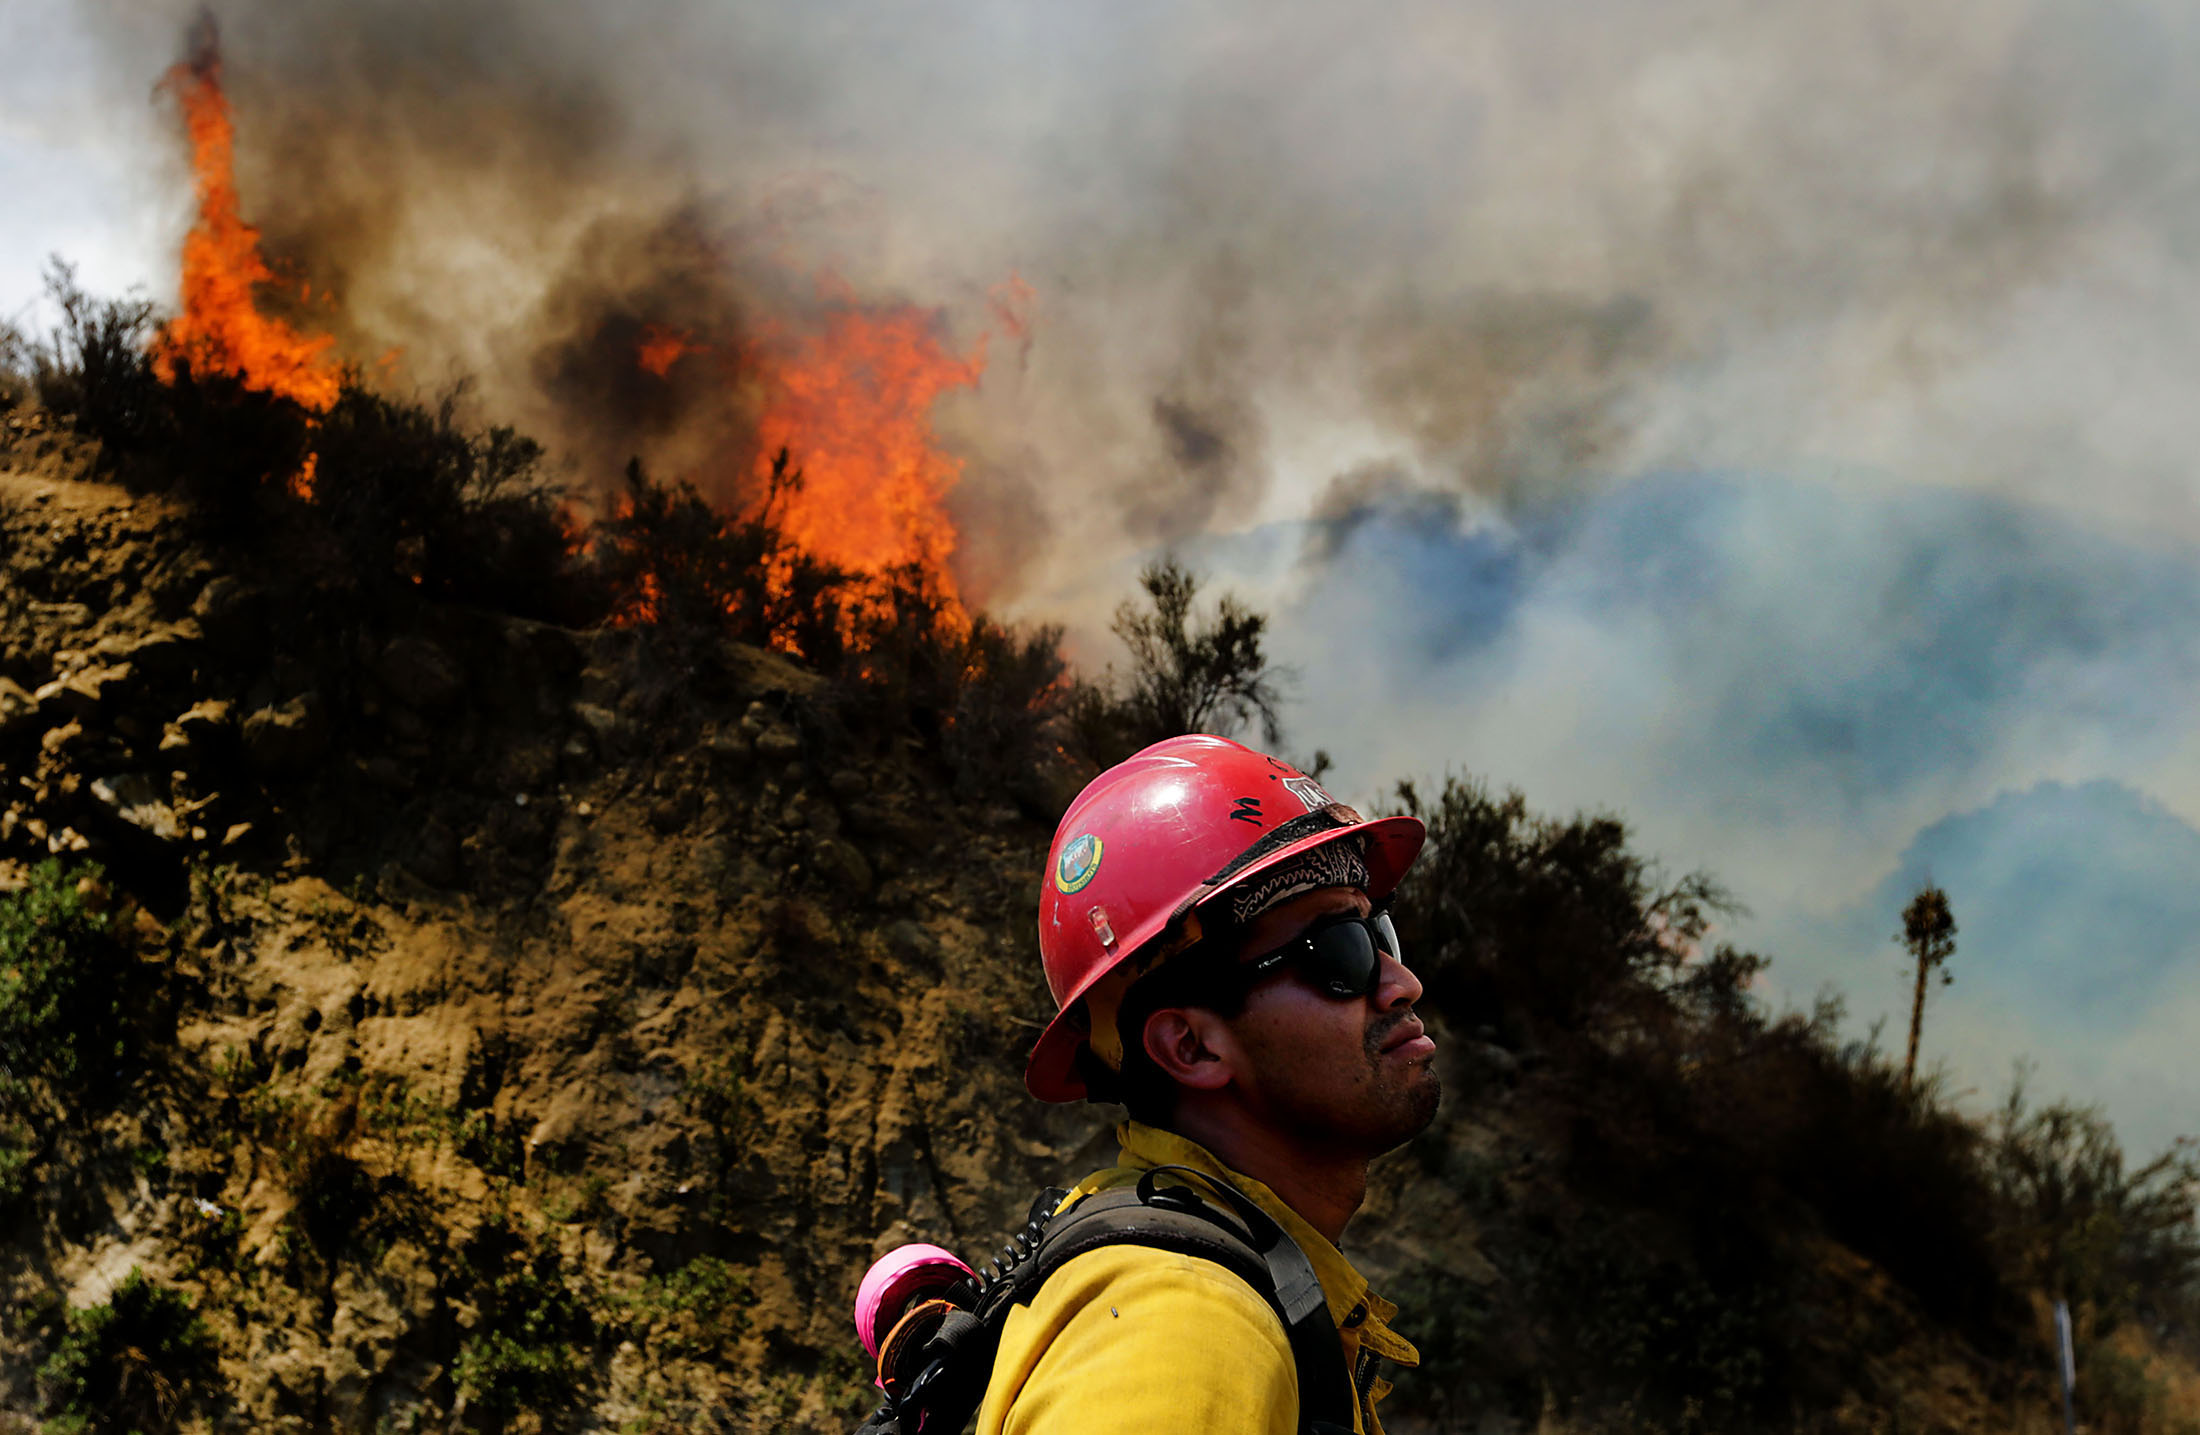  A Hotshot firefighter watches as Cranston fire grows to over 1,200 acres in the San Bernardino National Forest above Hemet on Wednesday, July 25, 2018.  